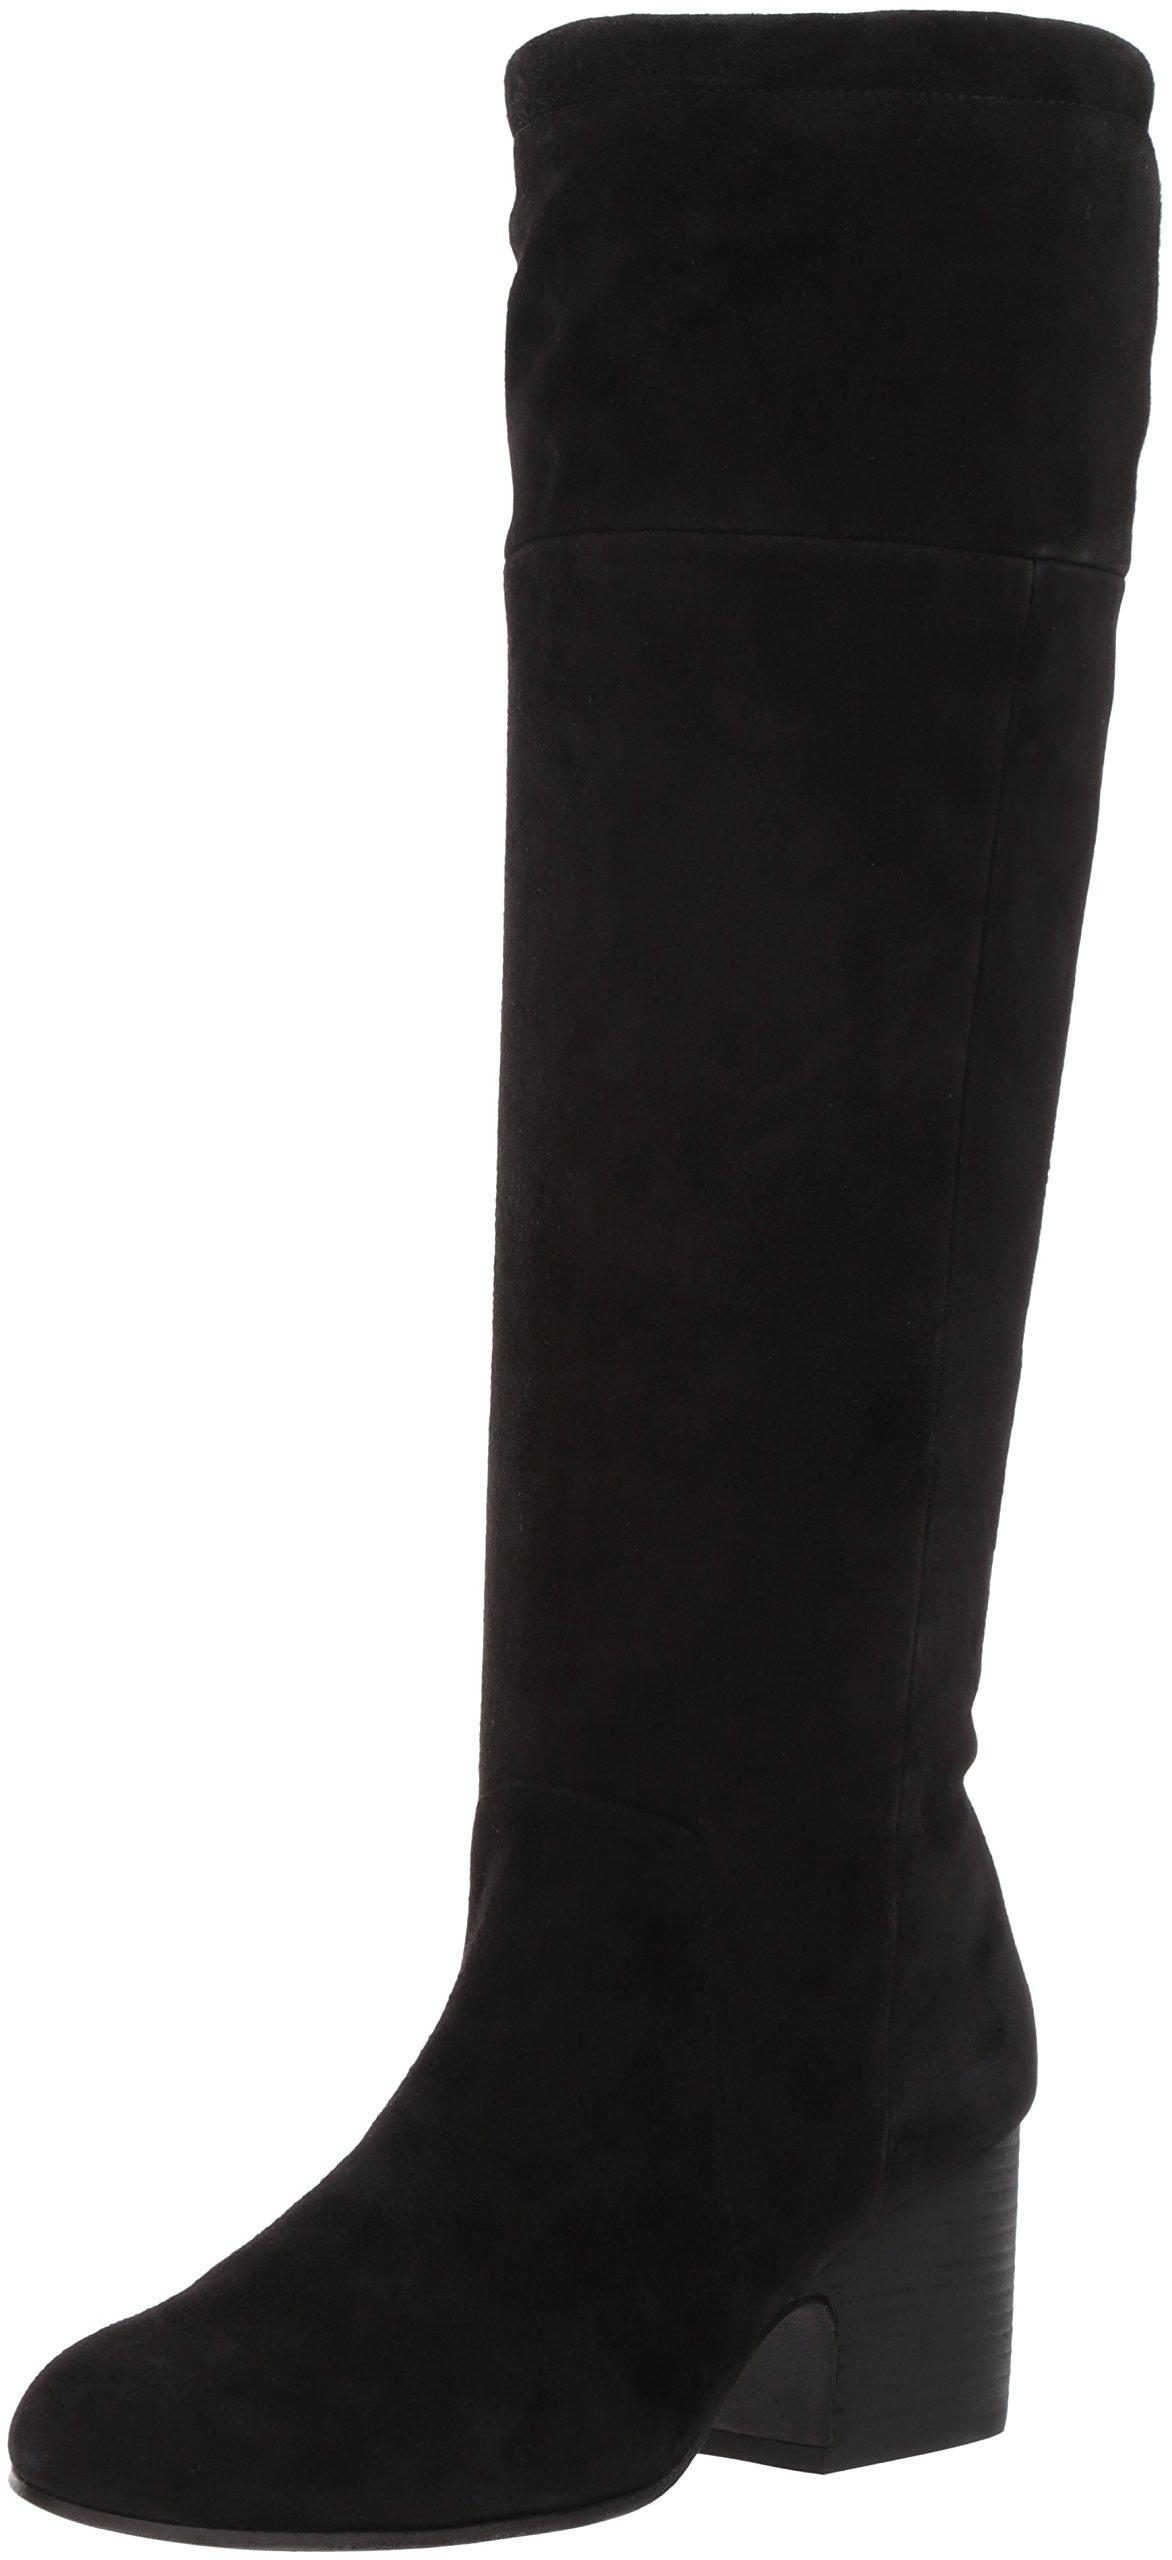 Eileen Fisher Suede Tall Knee High Boot in Black Save 64